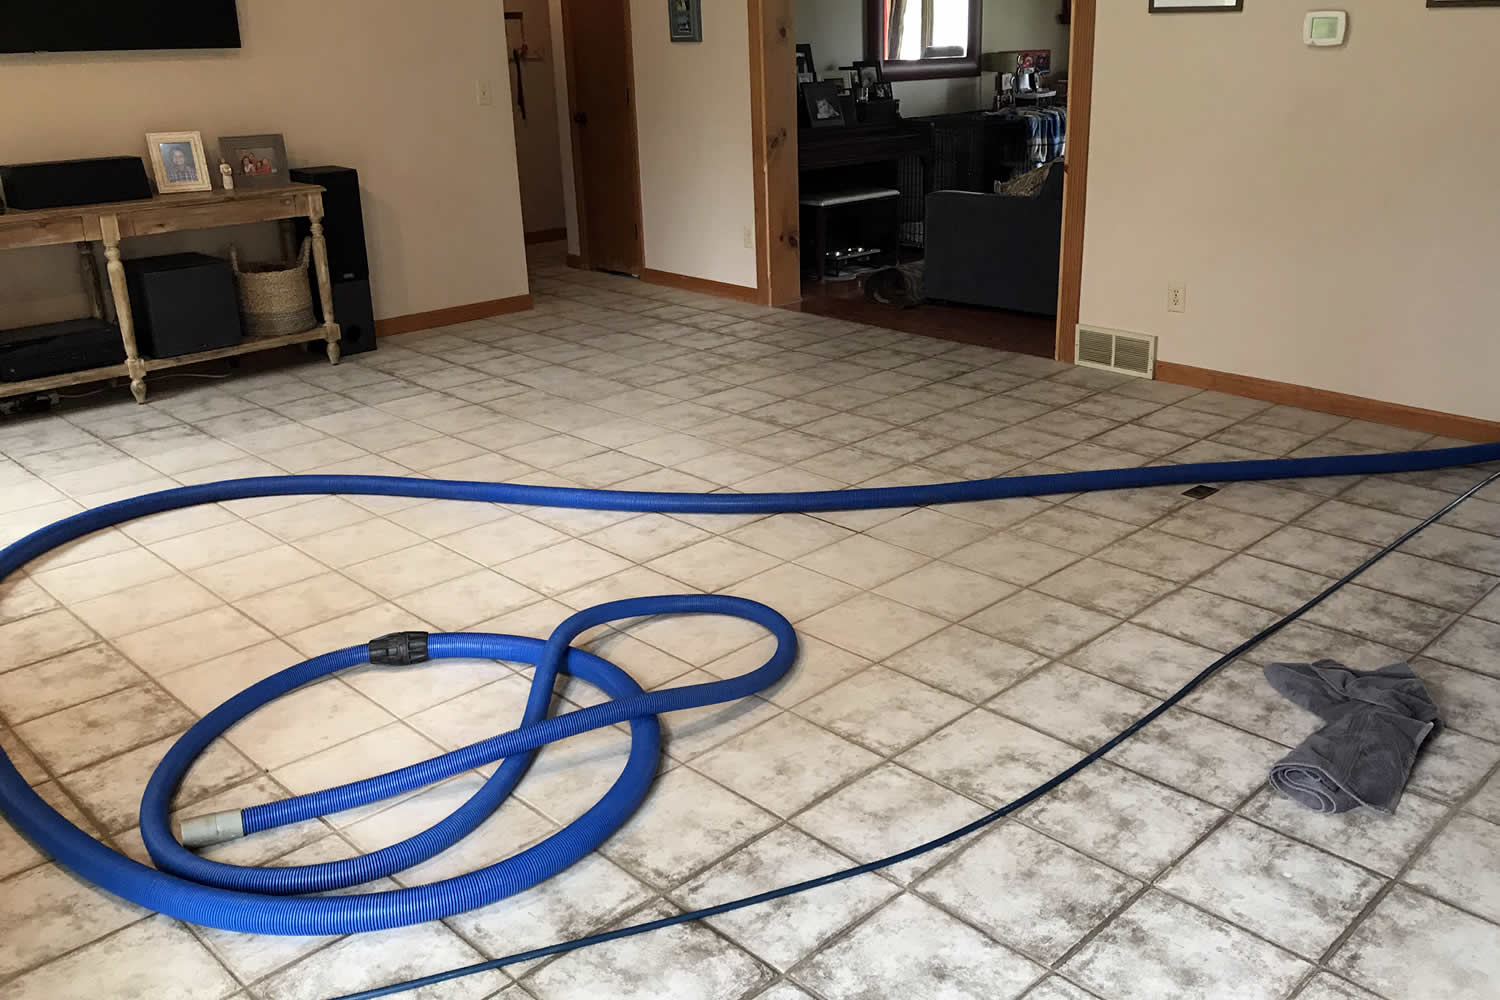 carolina-clean-pro-carpet-cleaning-upholstery-tile-grout-cleaning-hard-floor-hardwood-floor-cleaning-service-for-Garner-Raleigh-Cary-Clayton-Smithfield-Johnston-County-Wake-County-NC-30